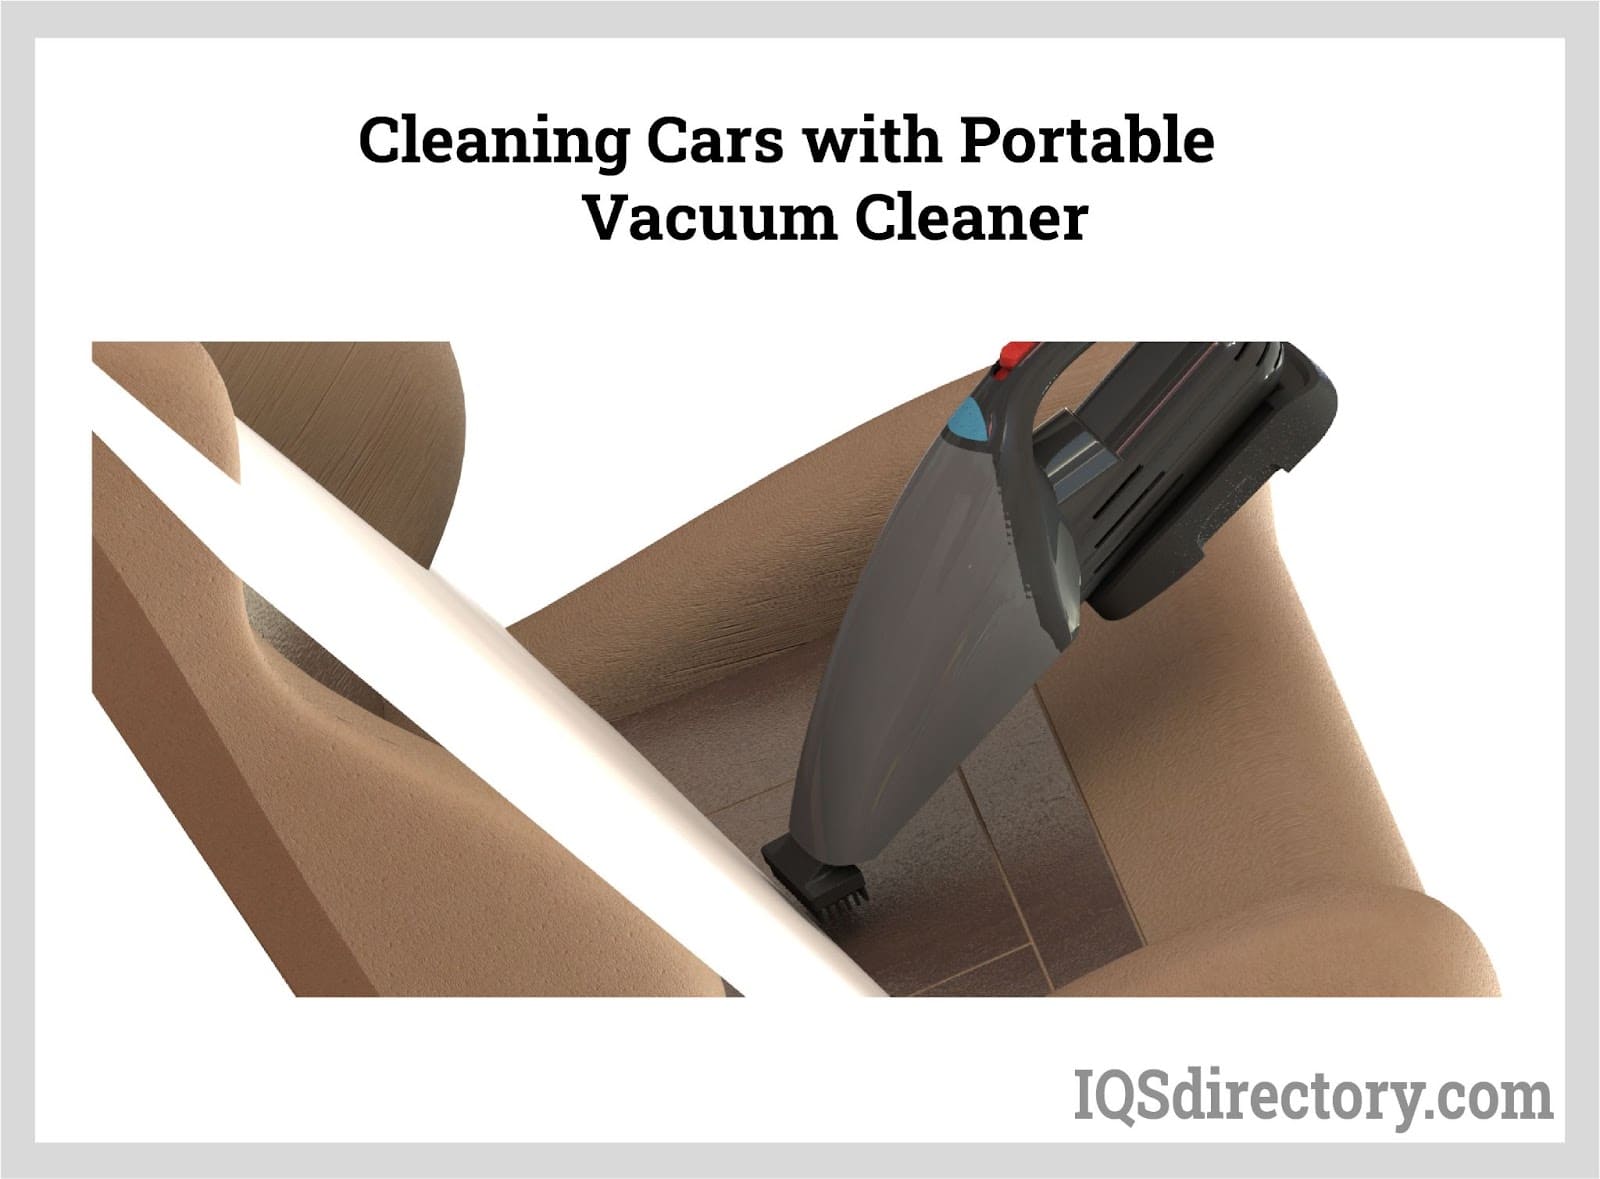 Cleaning Car with Portable Vacuum Cleaner